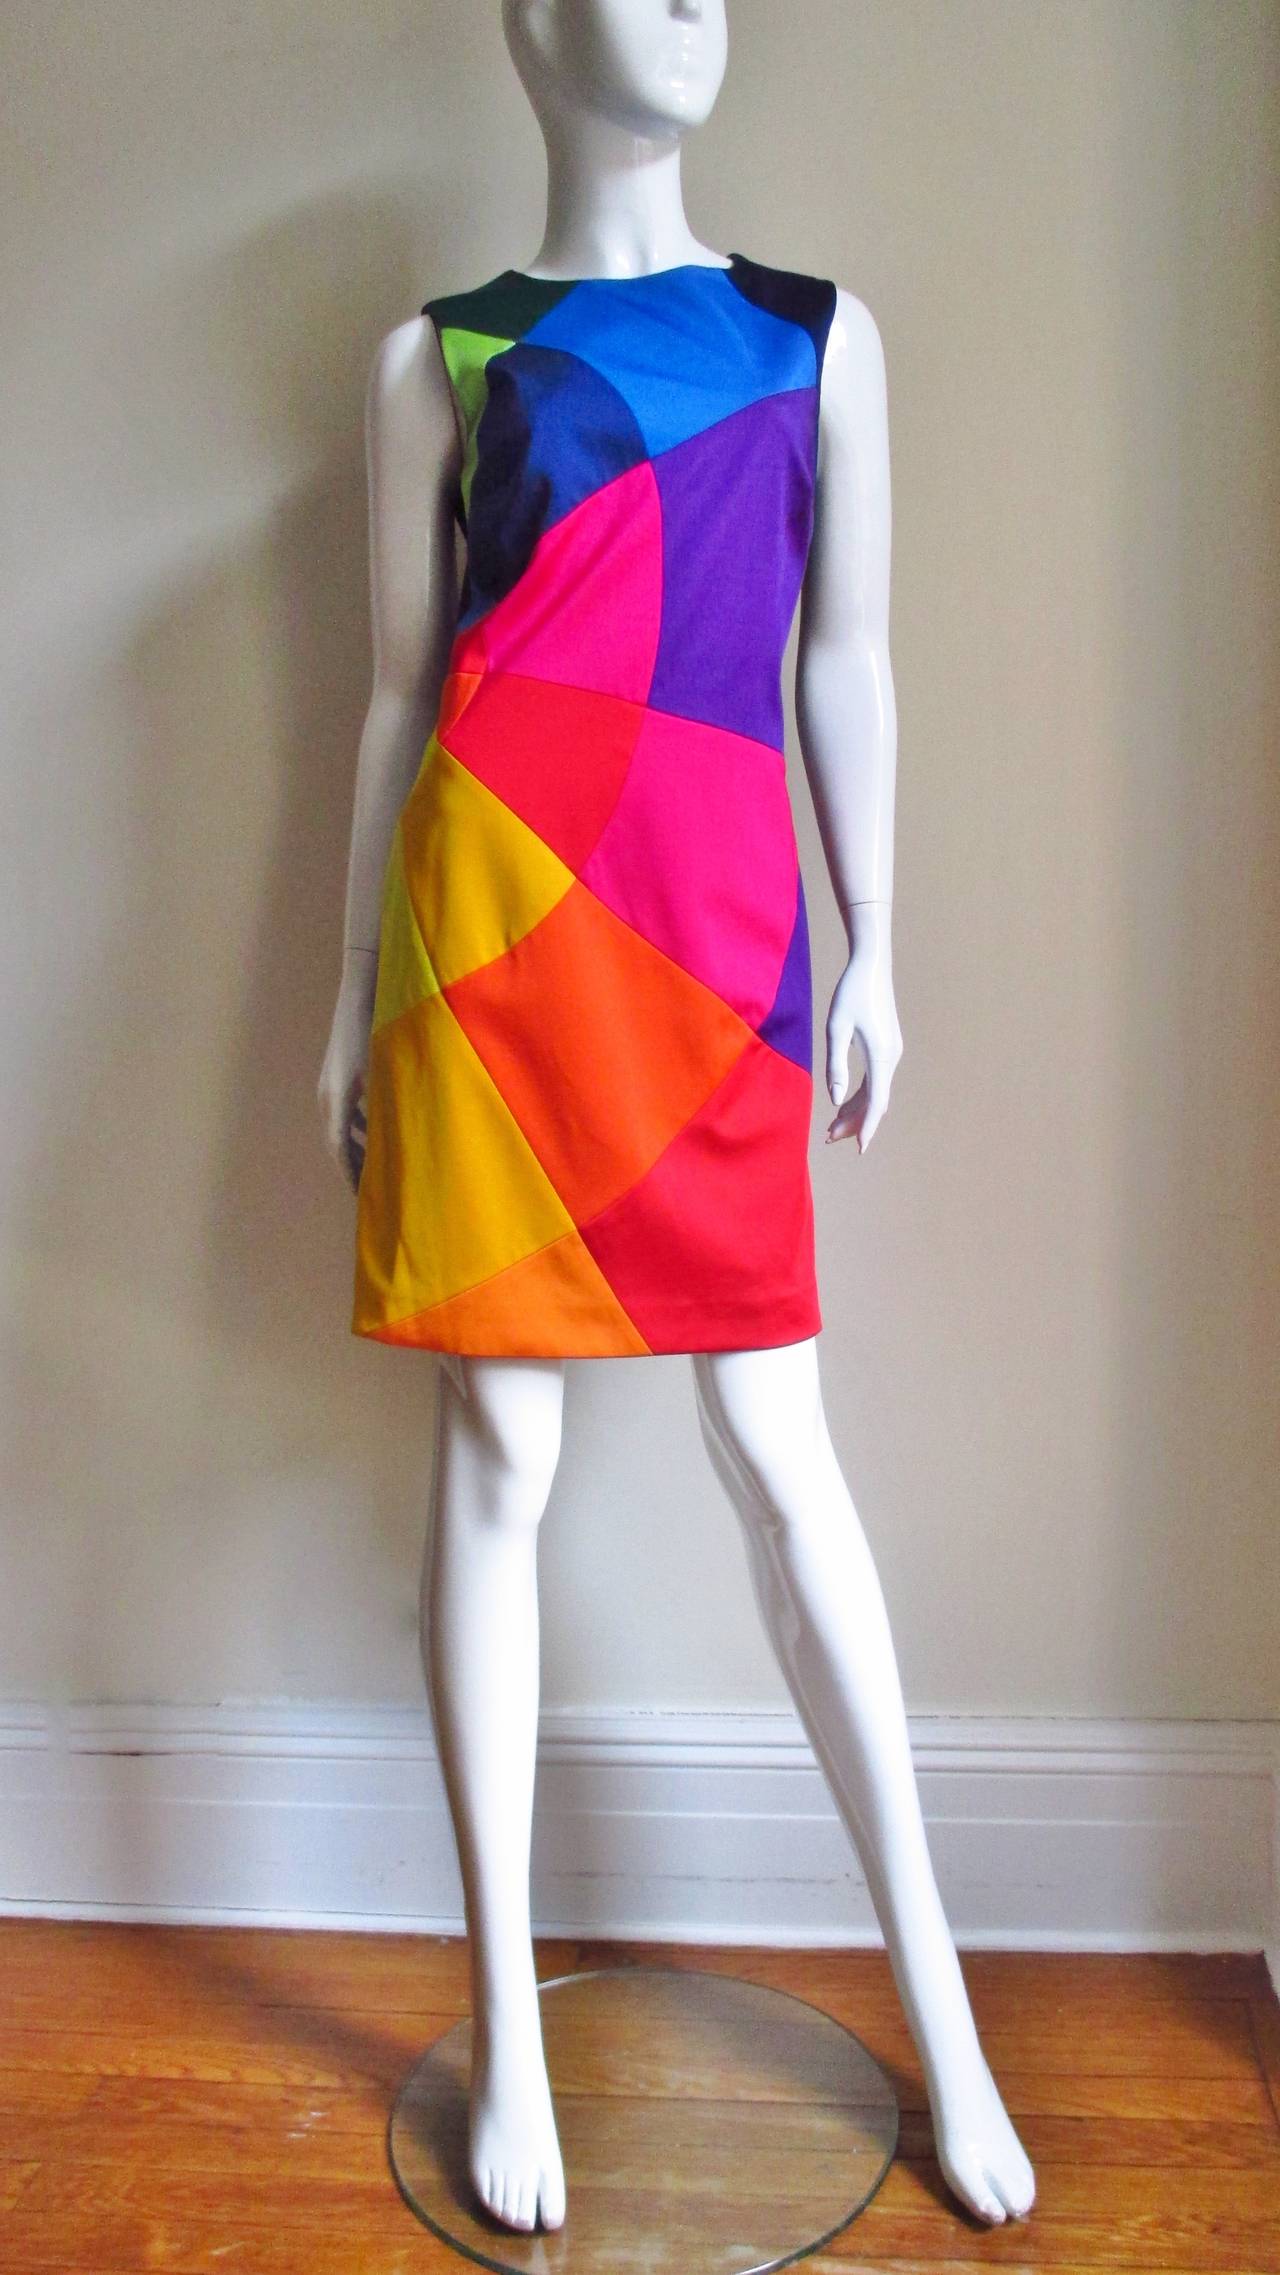 Moschino Color Block Rainbow Dress In Good Condition For Sale In Water Mill, NY